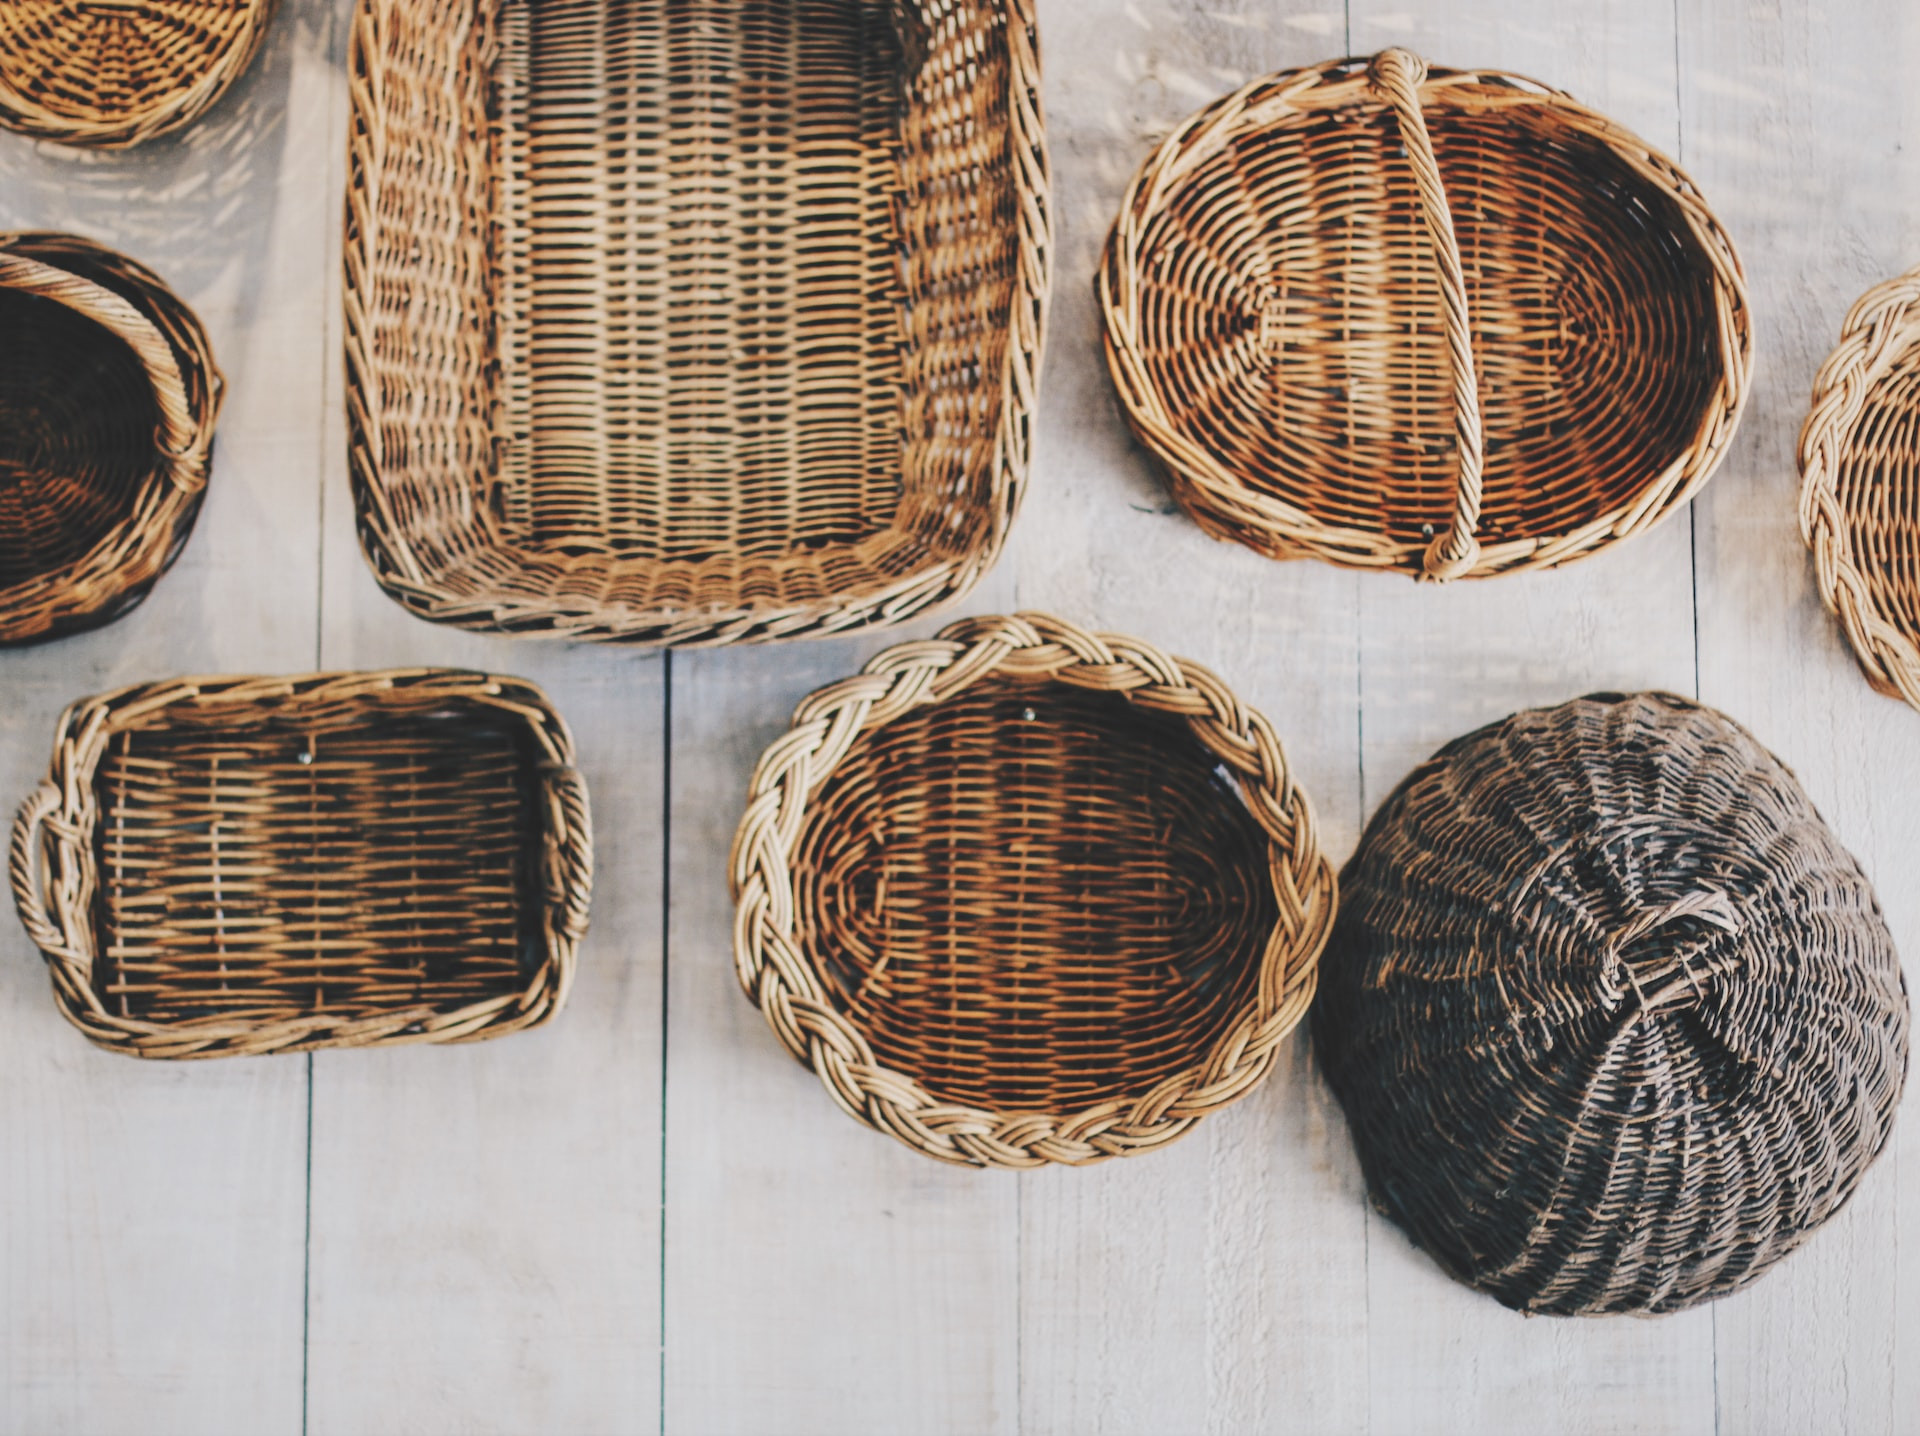 Beautiful baskets that have been made by Vietnamese artisans